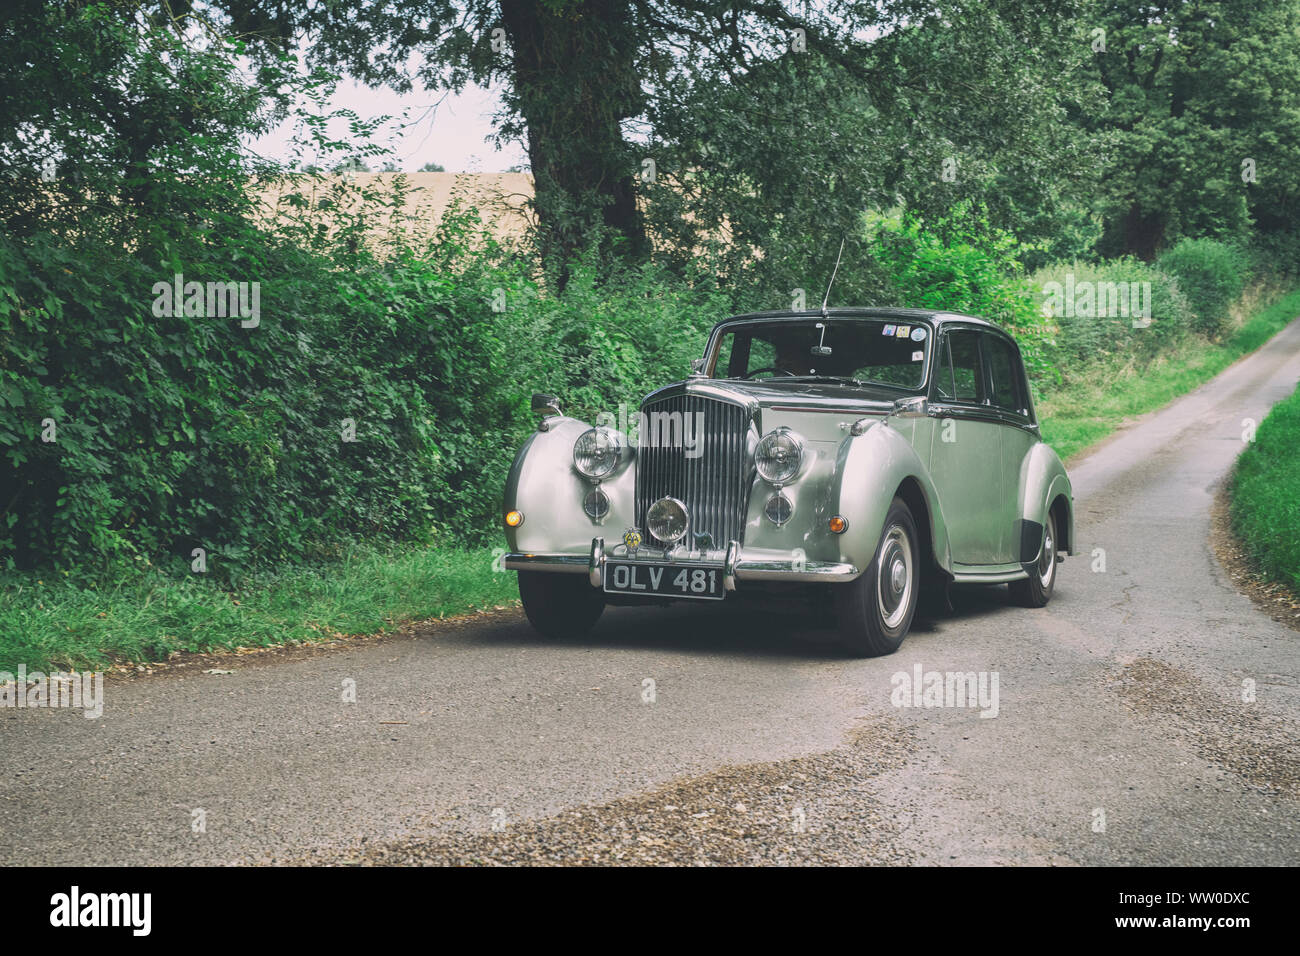 1953 Bentley going to a classic car show in the Oxfordshire countryside. Broughton, Banbury, England. Vintage filter applied Stock Photo